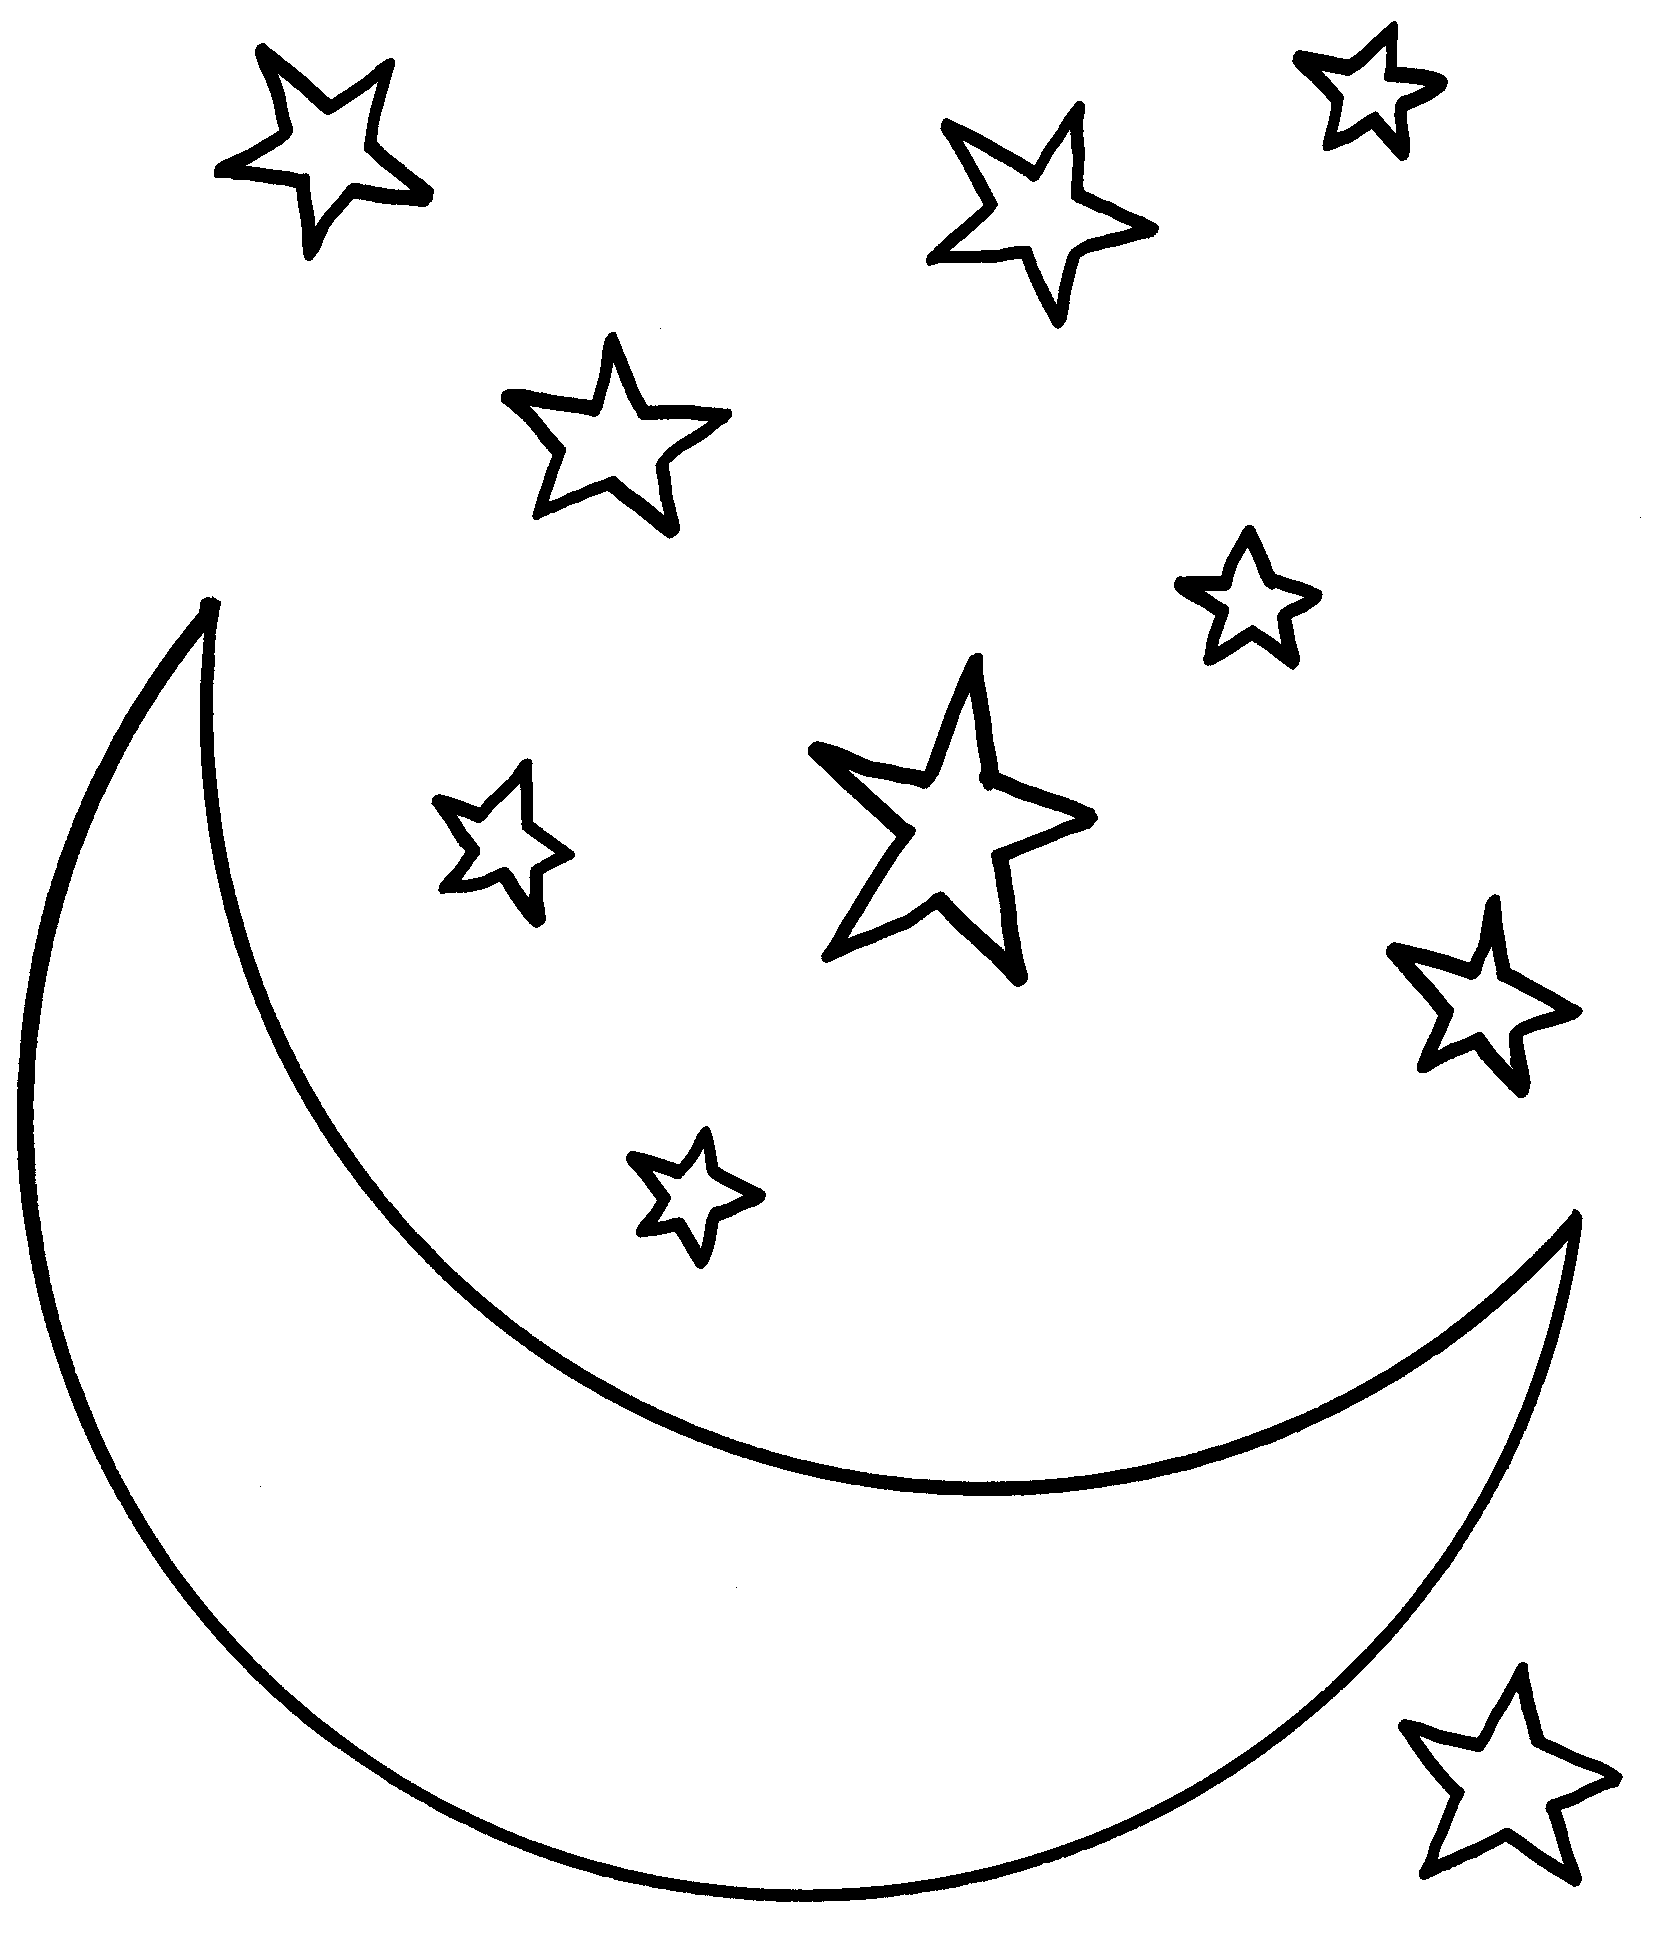 Moon  black and white moon clipart black and white clipart